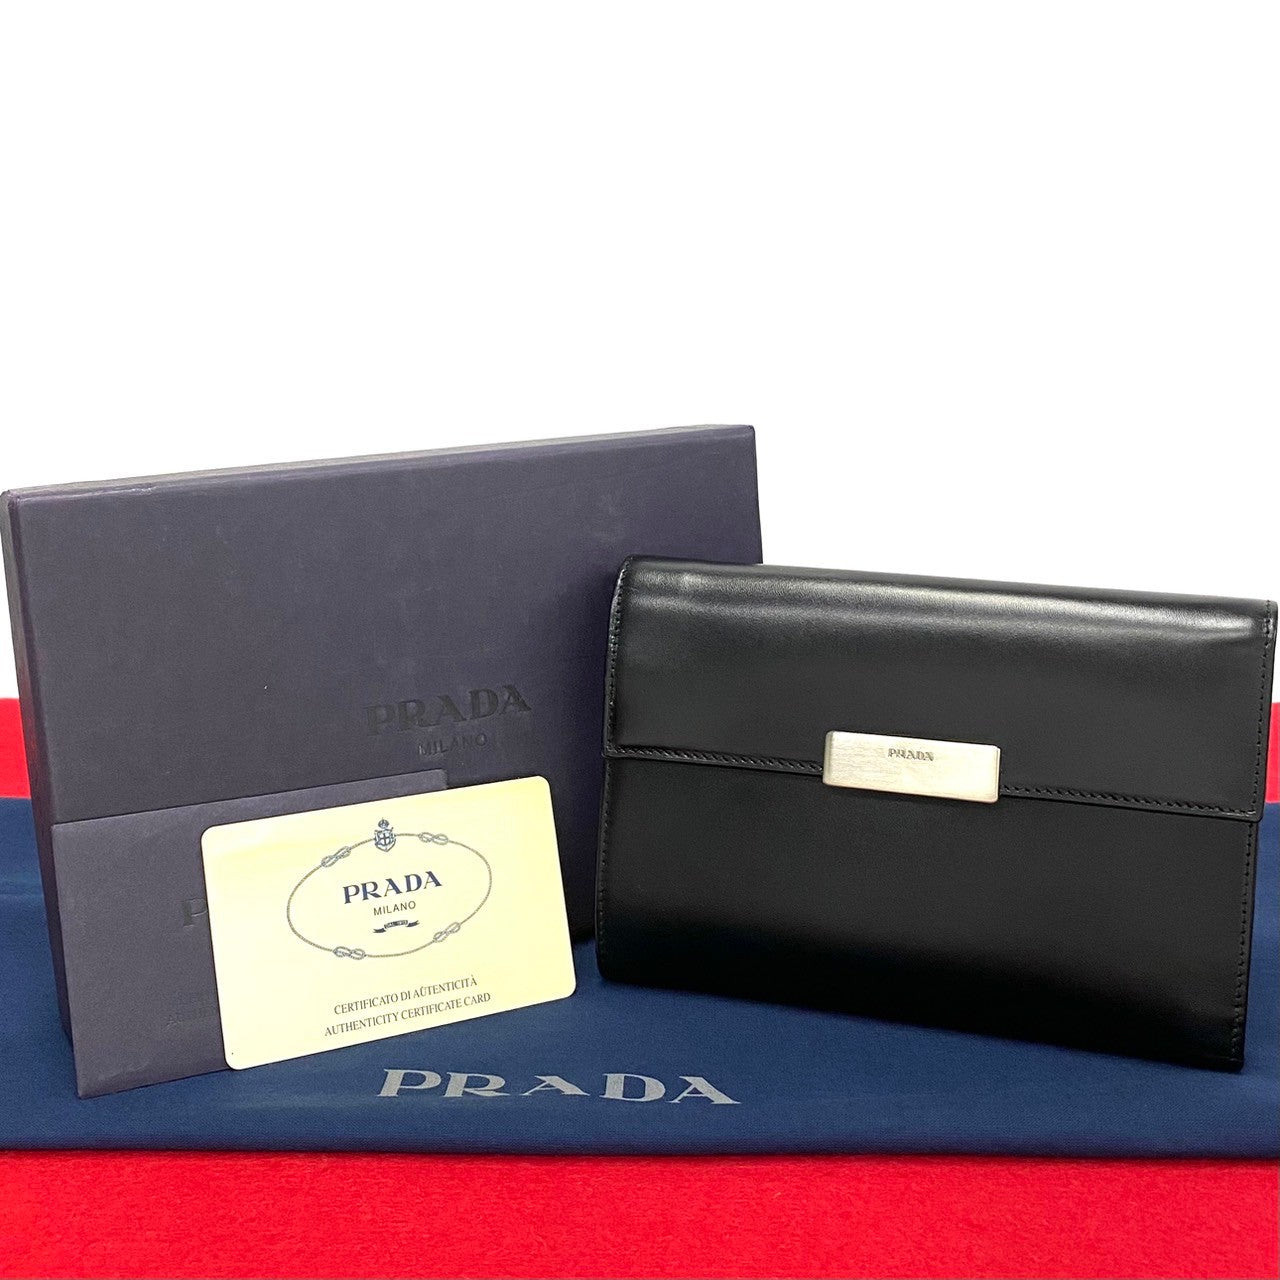 Prada Leather Bifold Compact Wallet Leather Short Wallet in Excellent condition